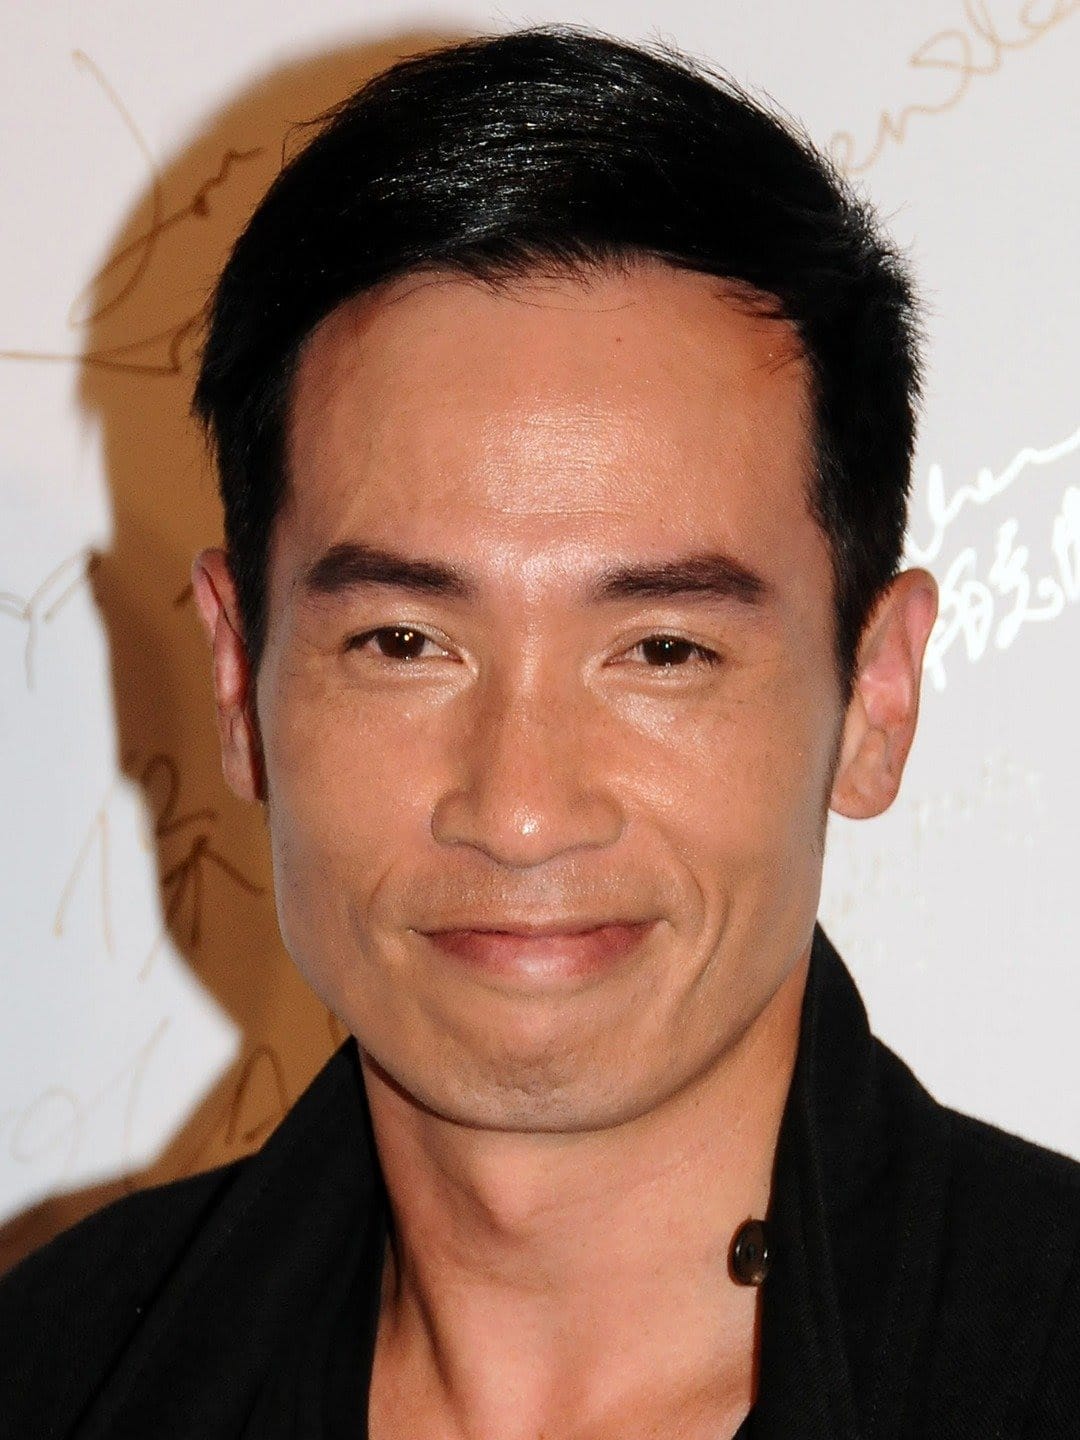 Moses Chan Chinese, Australian Actor, Singer, Model